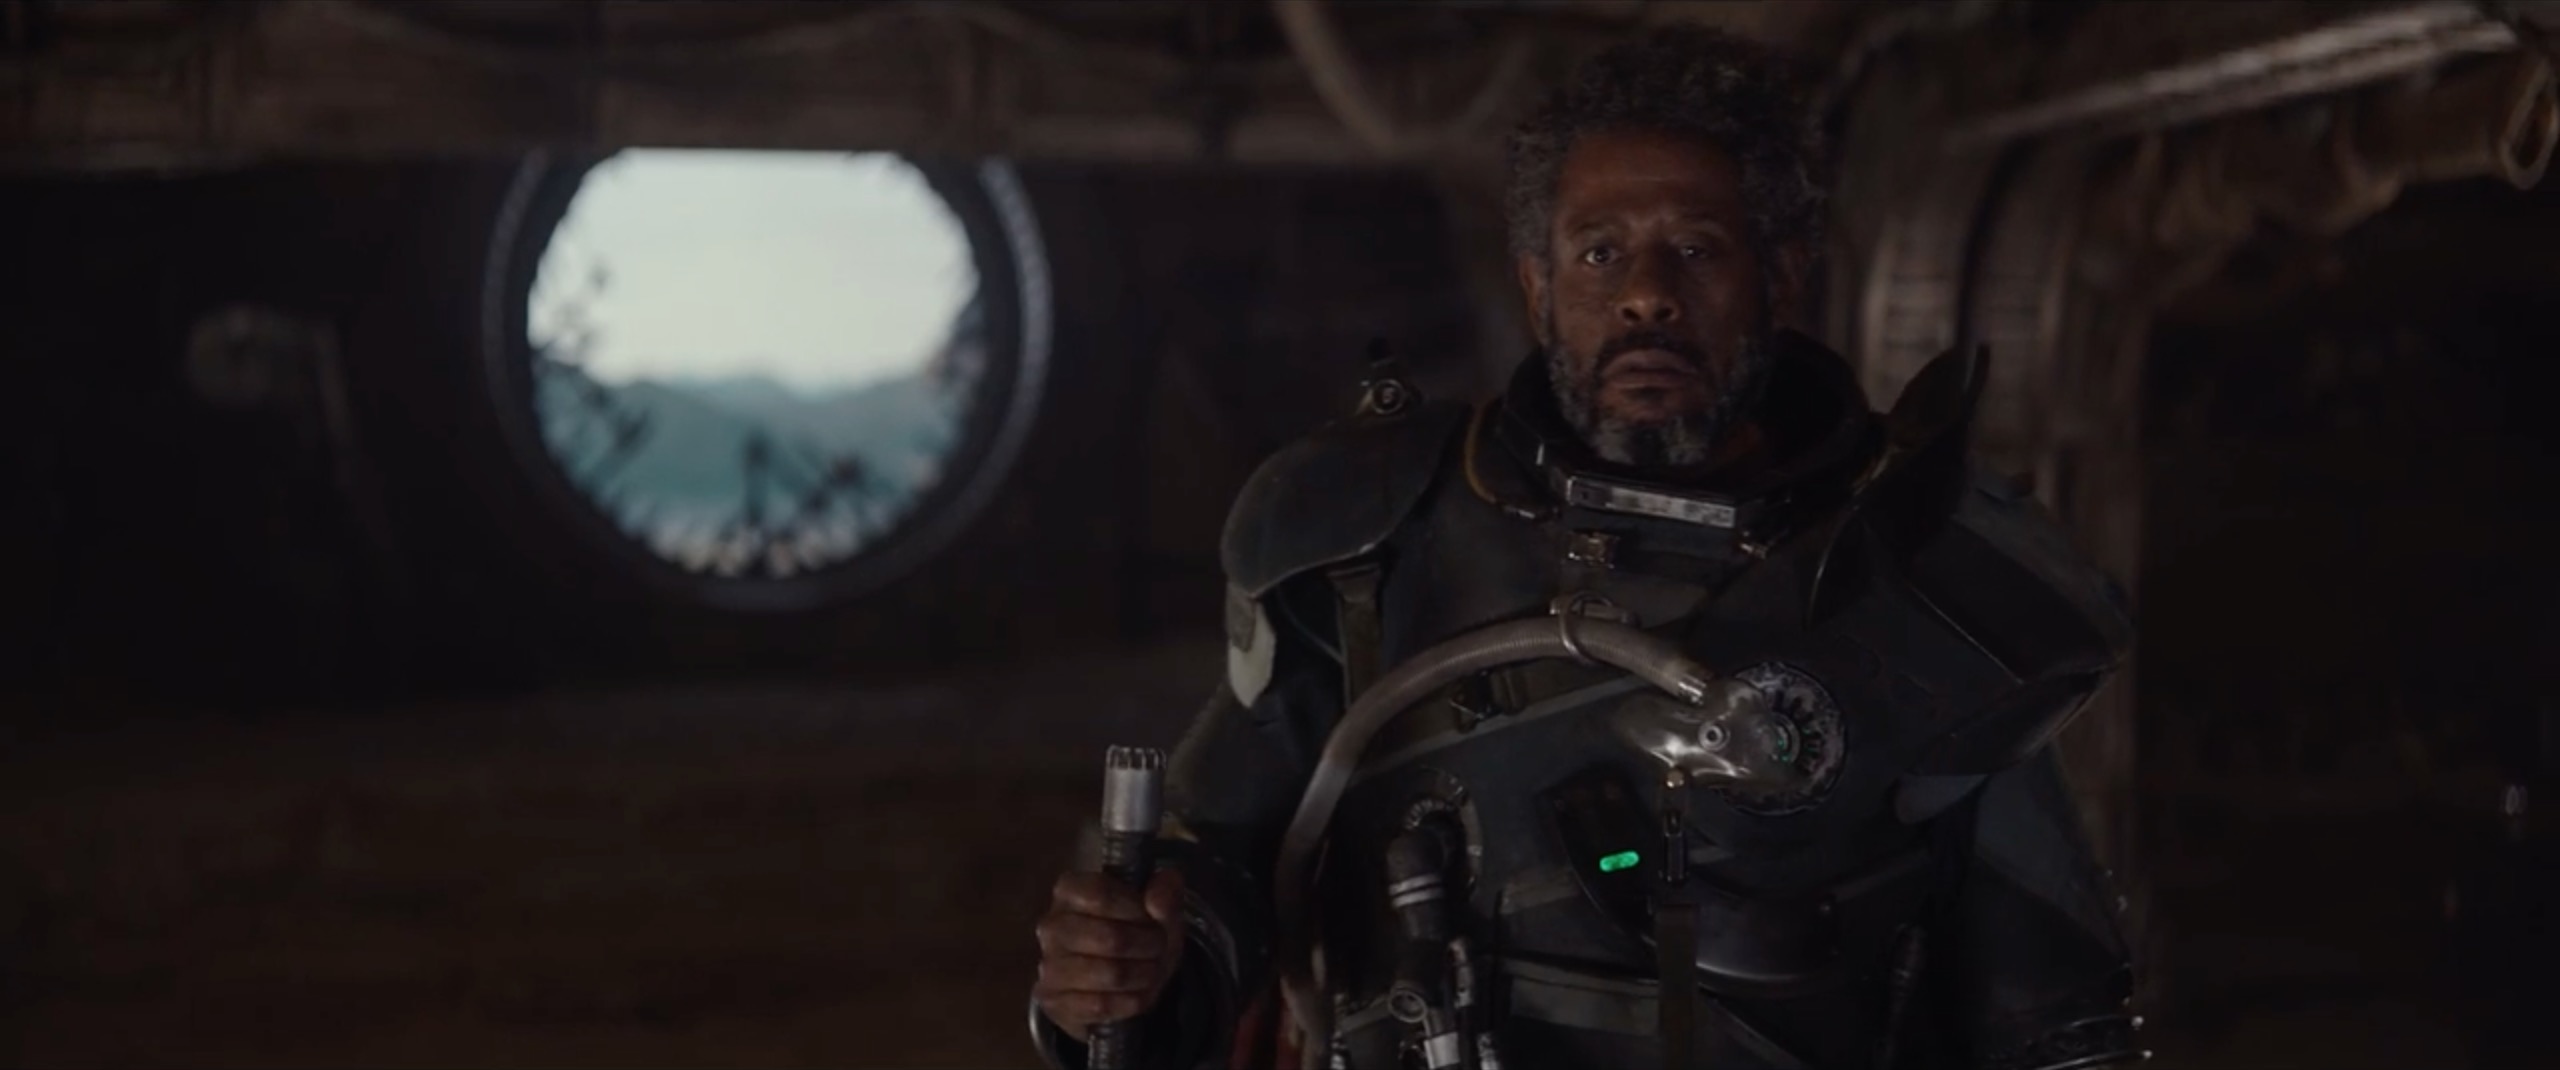 Forest Whitaker on His Role in 'Rogue One: A Star Wars Story